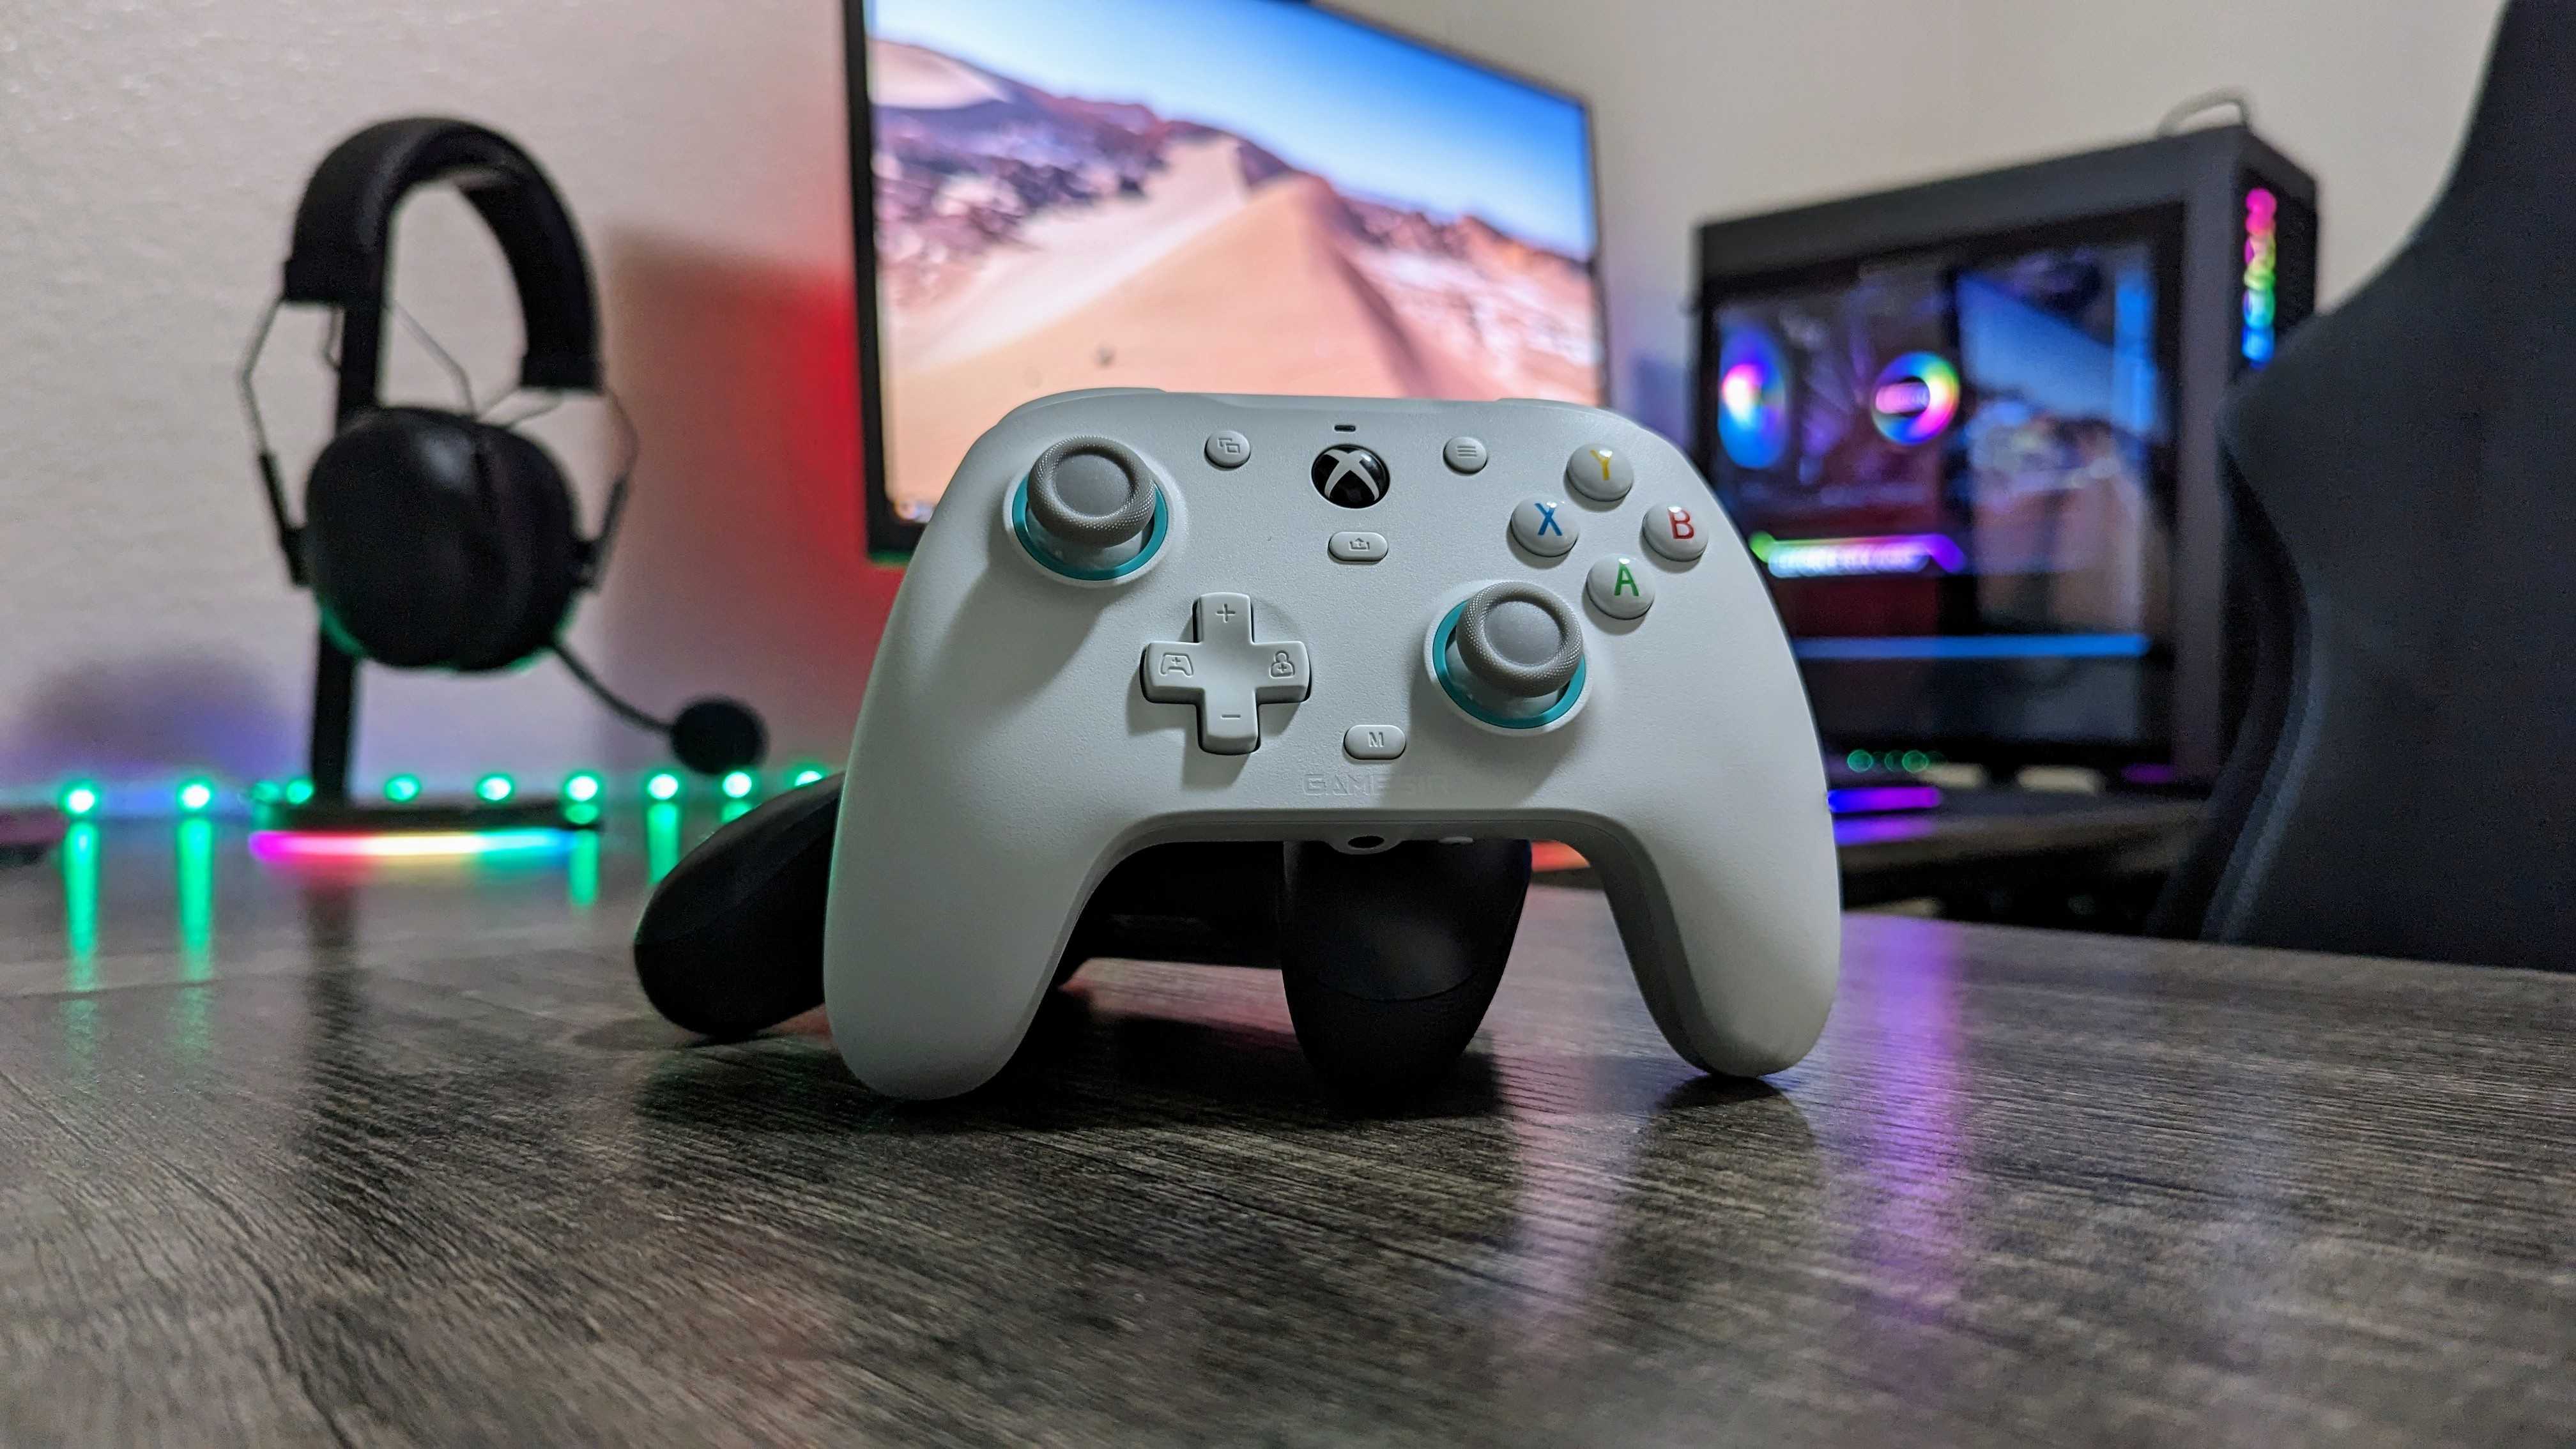 GameSir X2 review: a fantastic controller designed with the mobile gamer in  mind